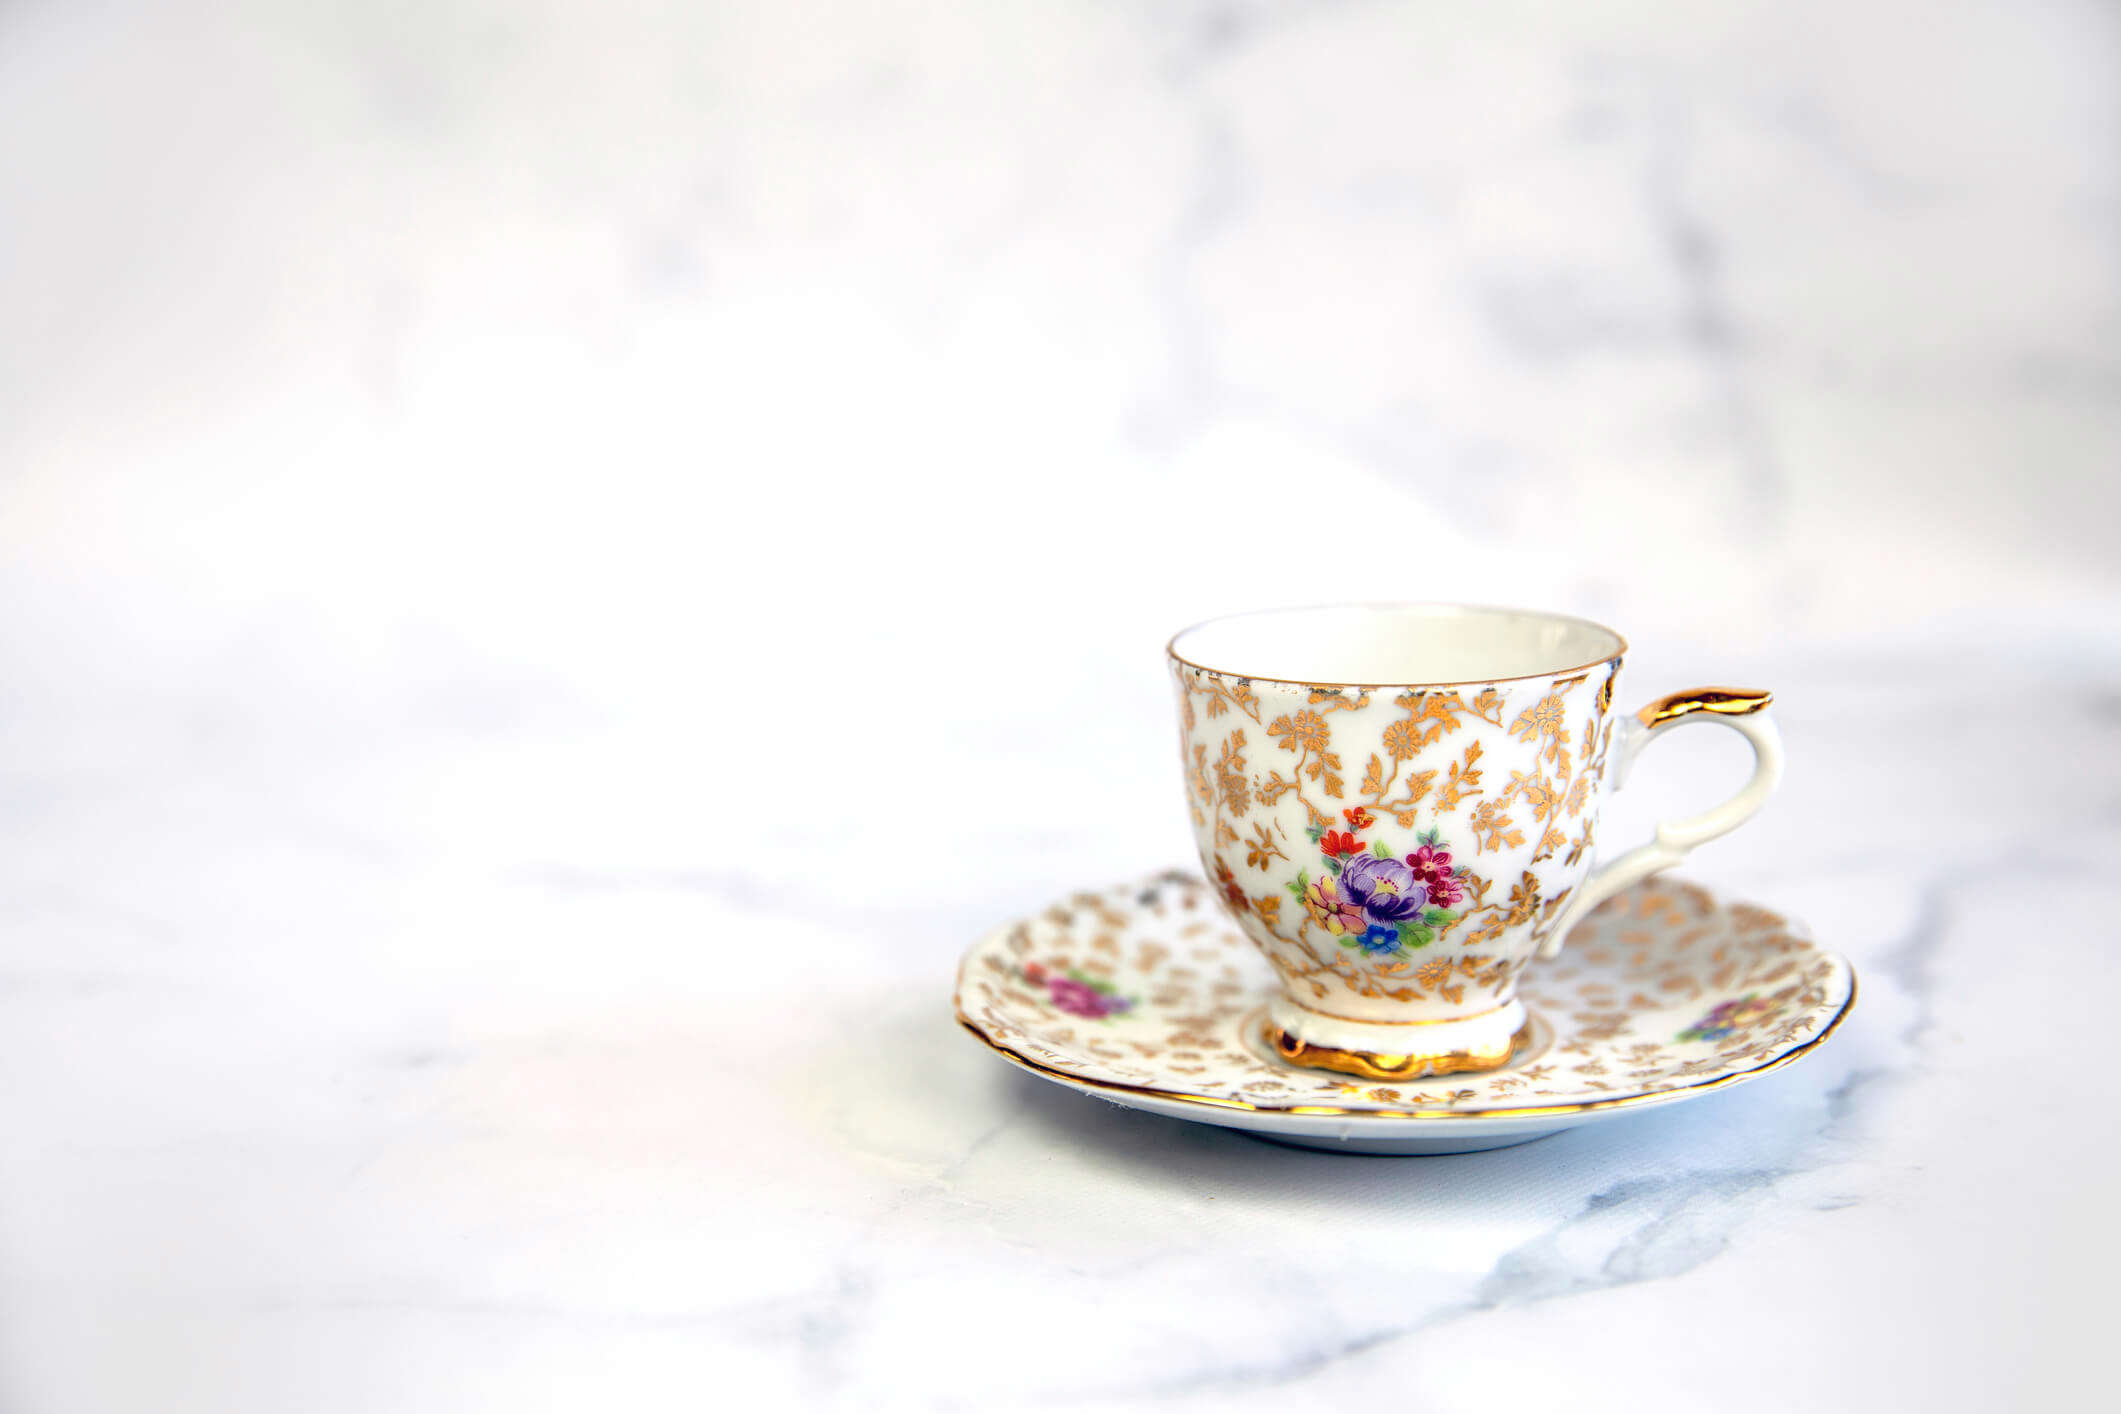 a decorative floral teacup on a saucer on a white background